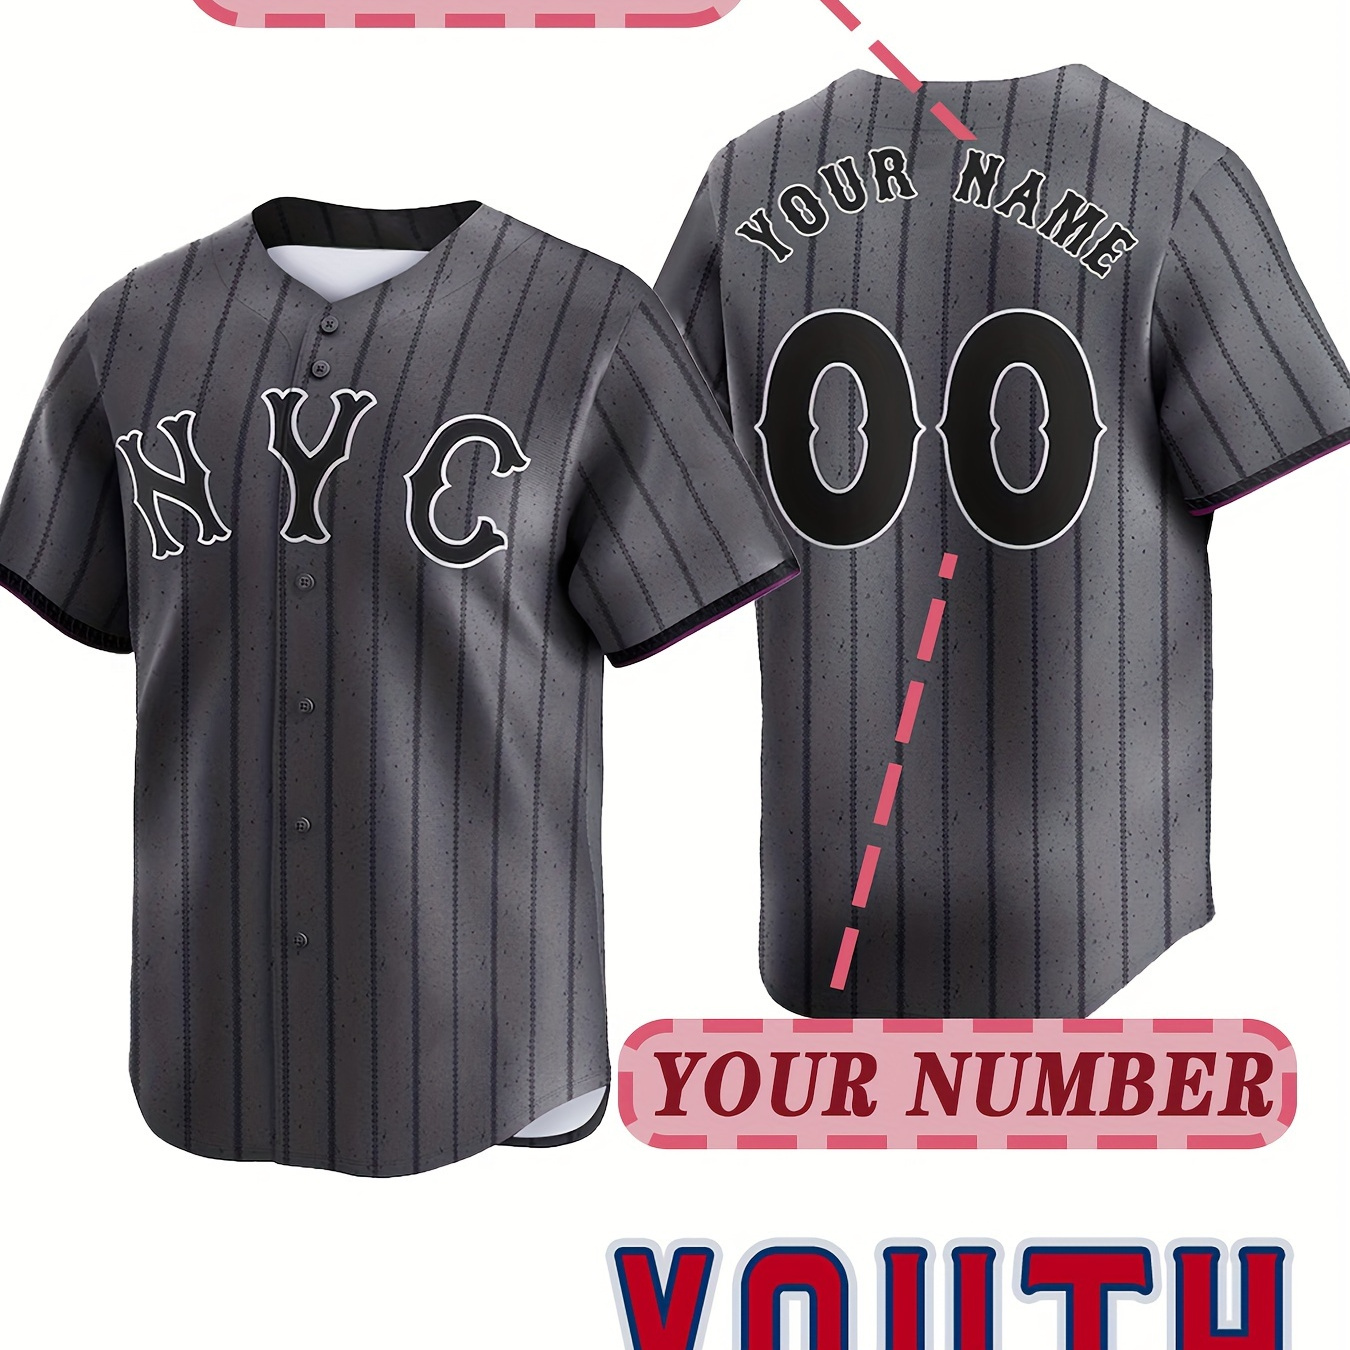 

Boy's Personalized Baseball Jersey - Customizable Name And Number Embroidery - Nyc Print Short Sleeve V Neck Buttons T-shirt For Summer